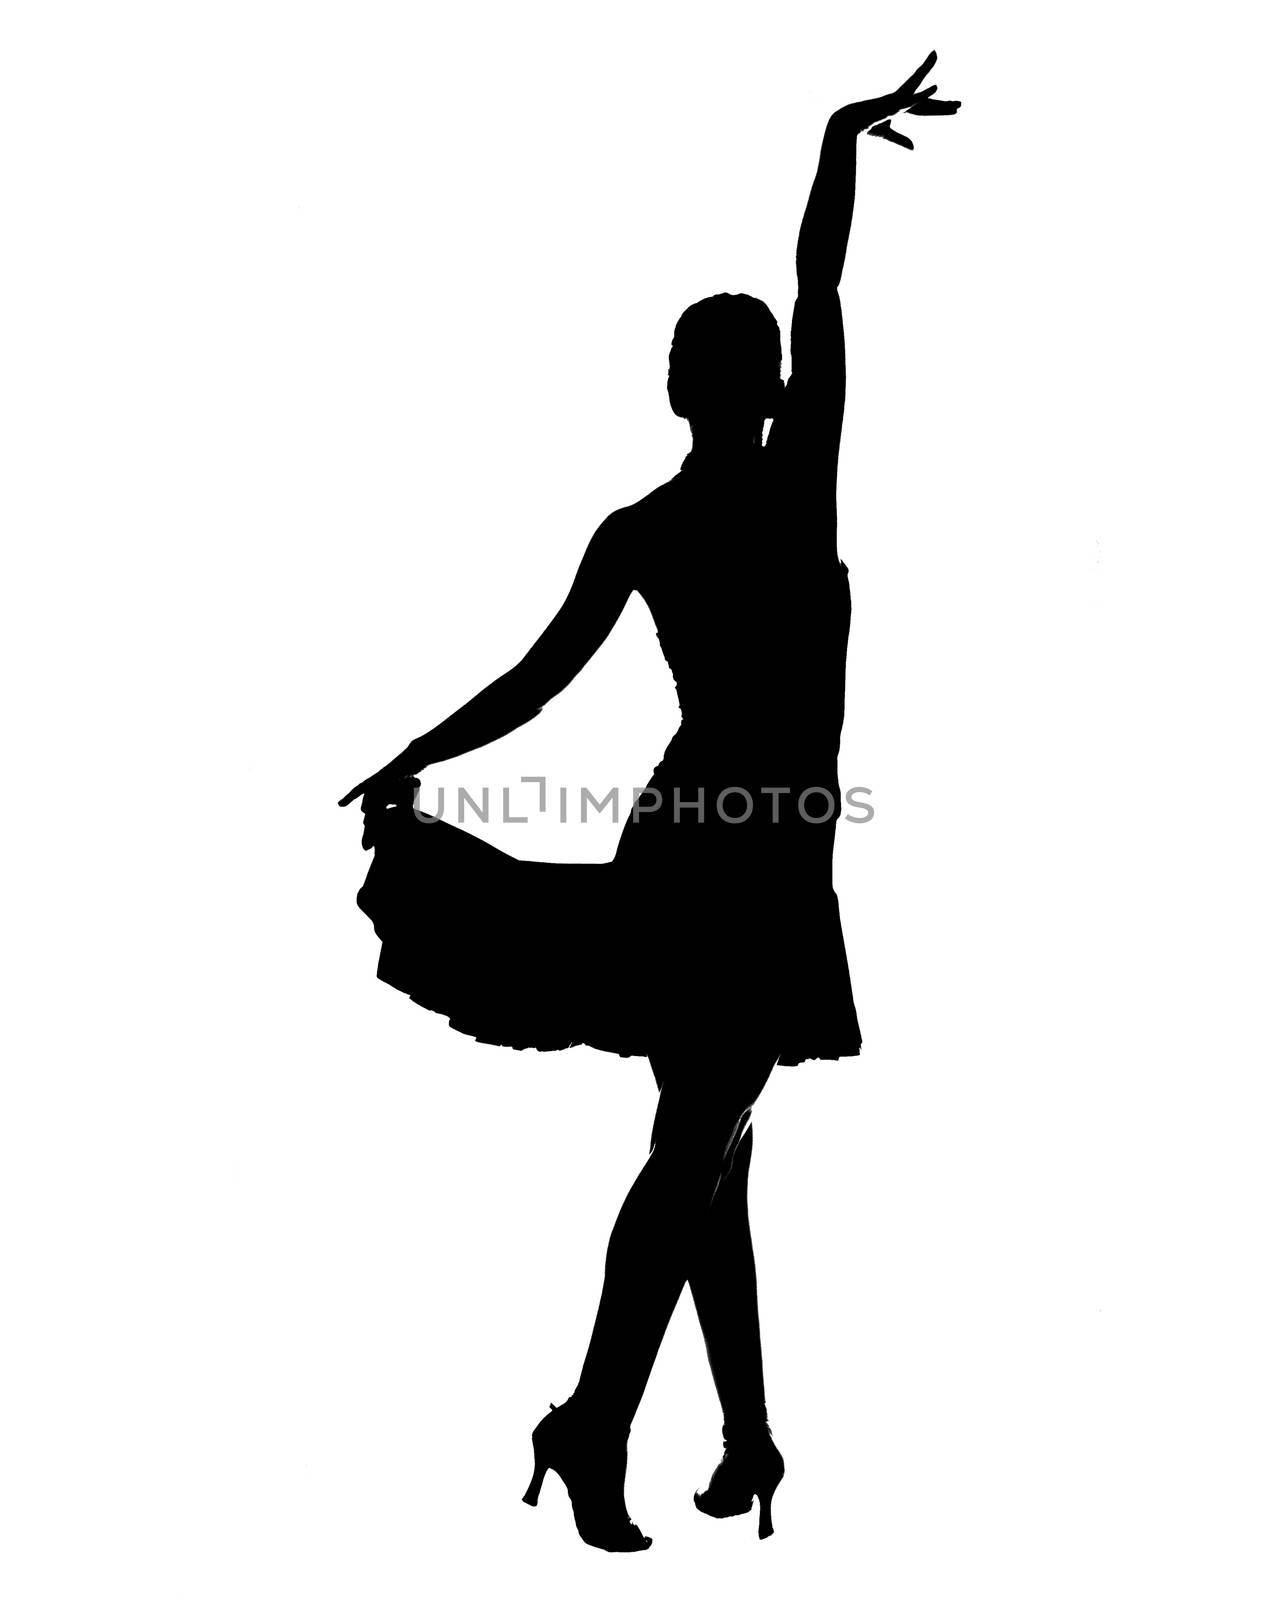 Latin dancer silhouette on a white background.